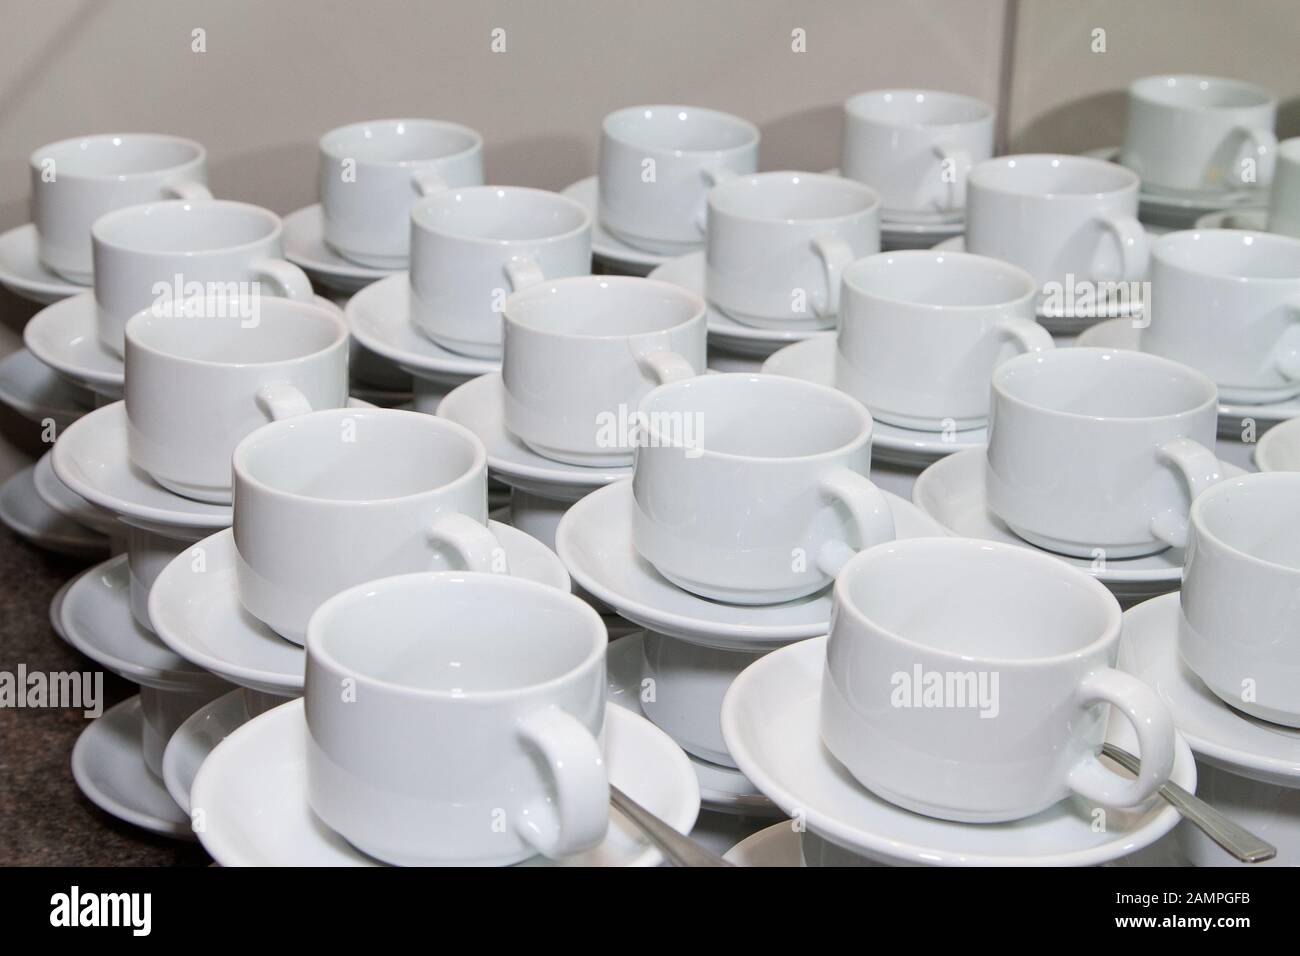 Rows of stacked cups and saucers ready for service. Stock Photo